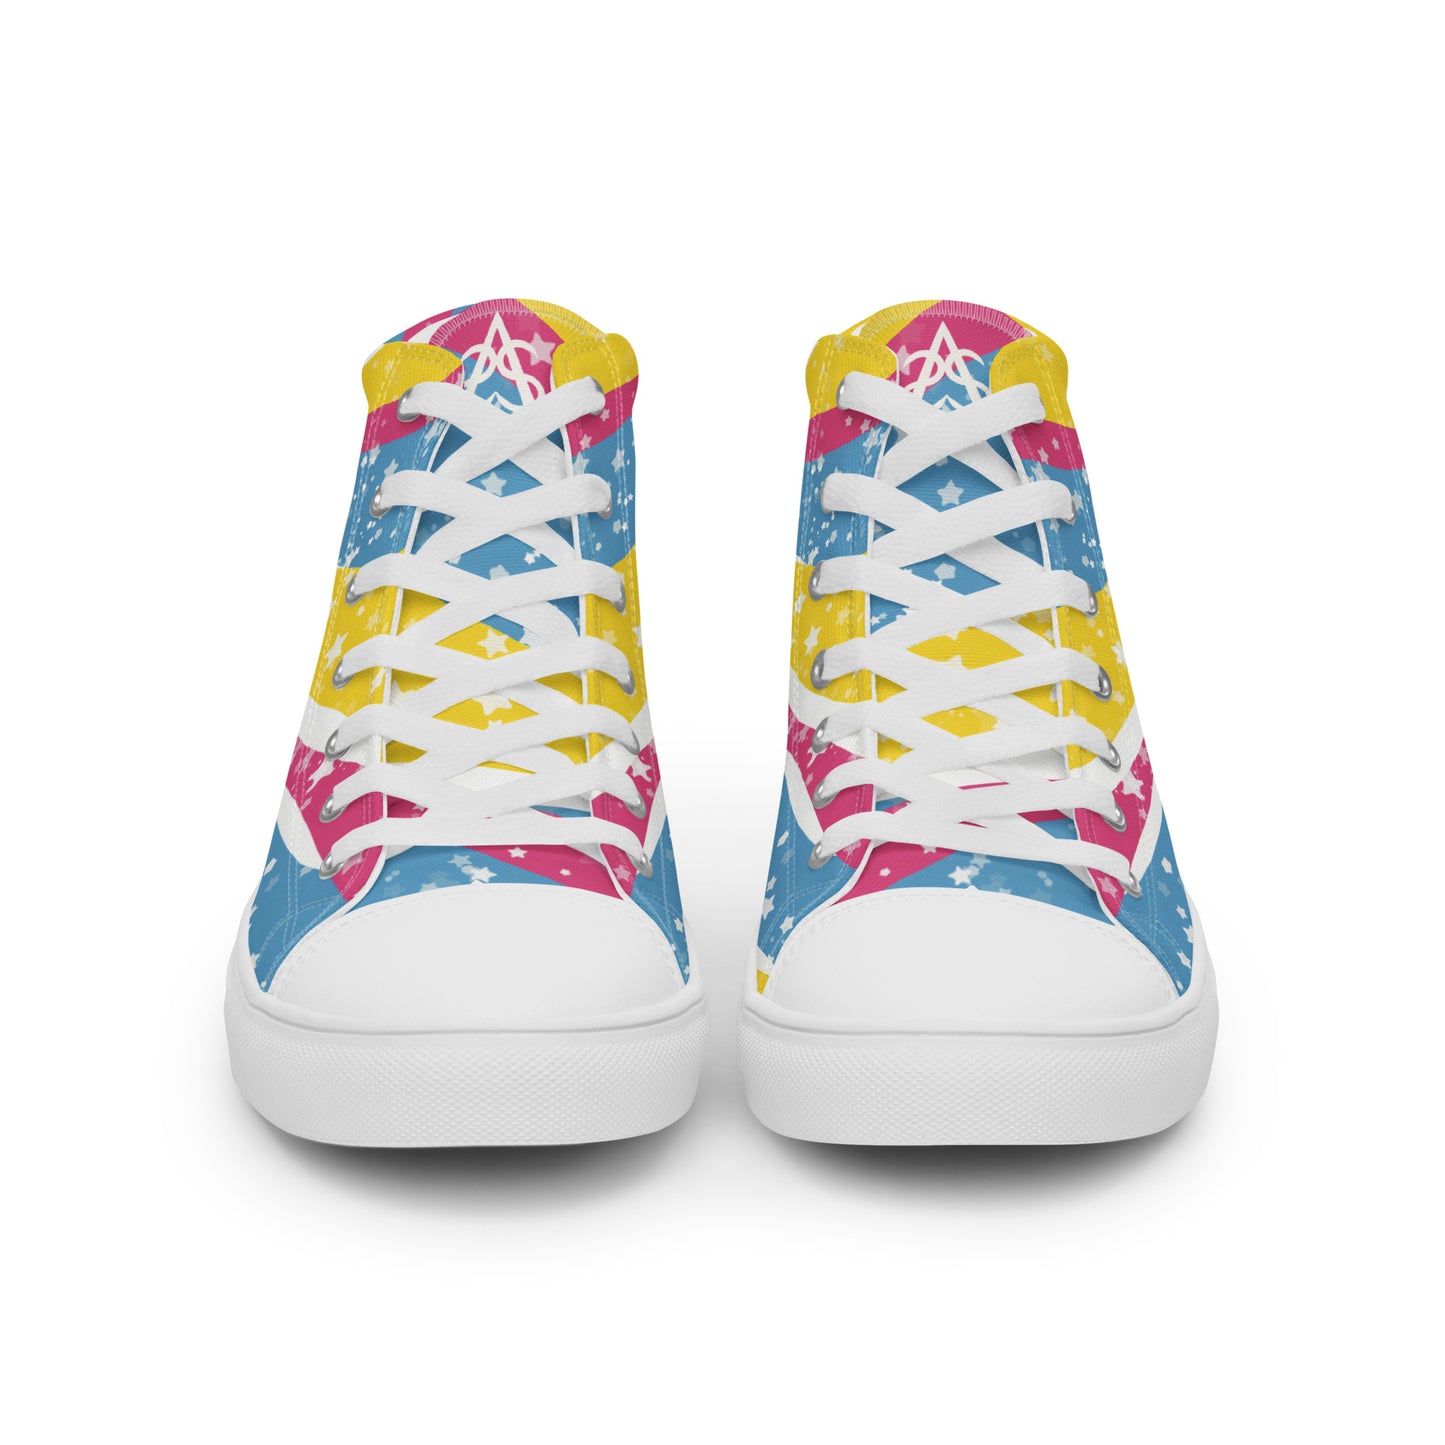 Front view: a pair of high top shoes with pink, yellow, and blue ribbons that get larger from heel to laces, white stars, and the Aras Sivad logo on the tongue.